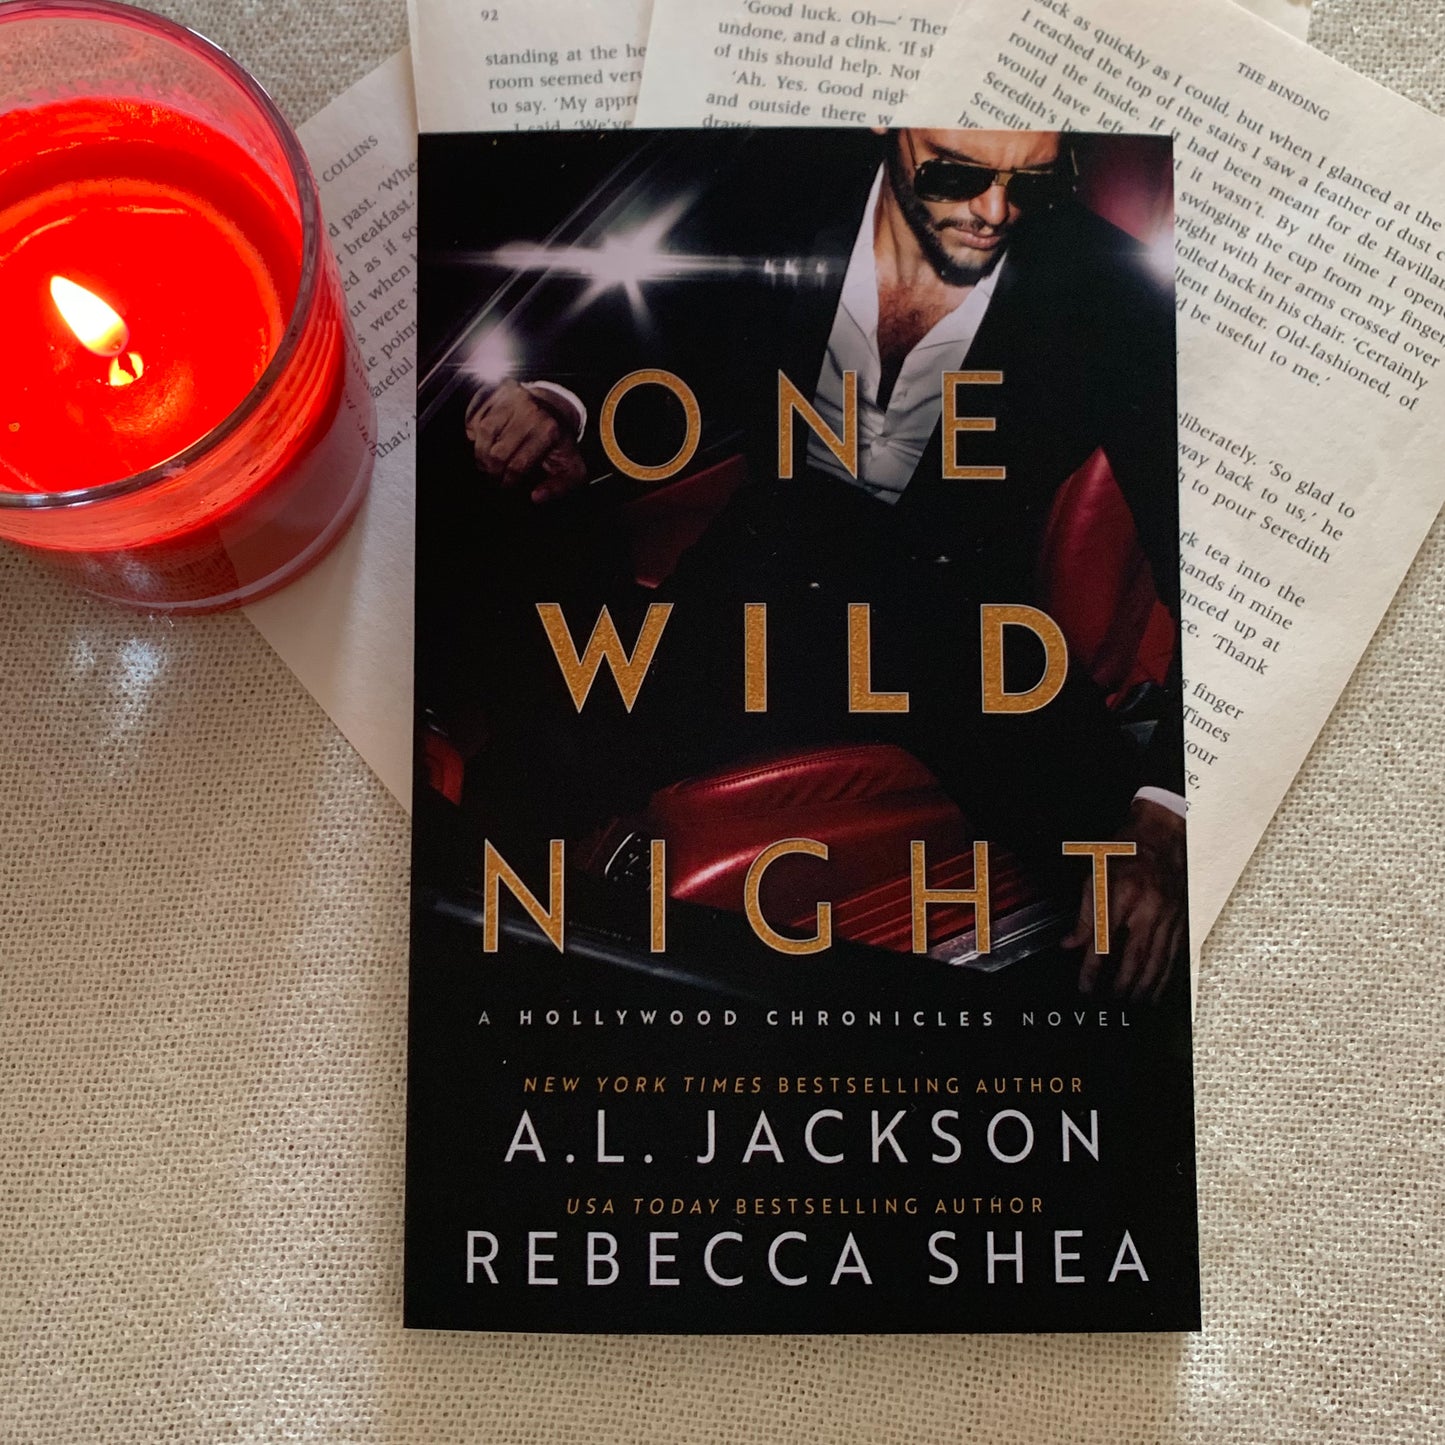 One Wild Night by A. L Jackson and Rebecca Shea